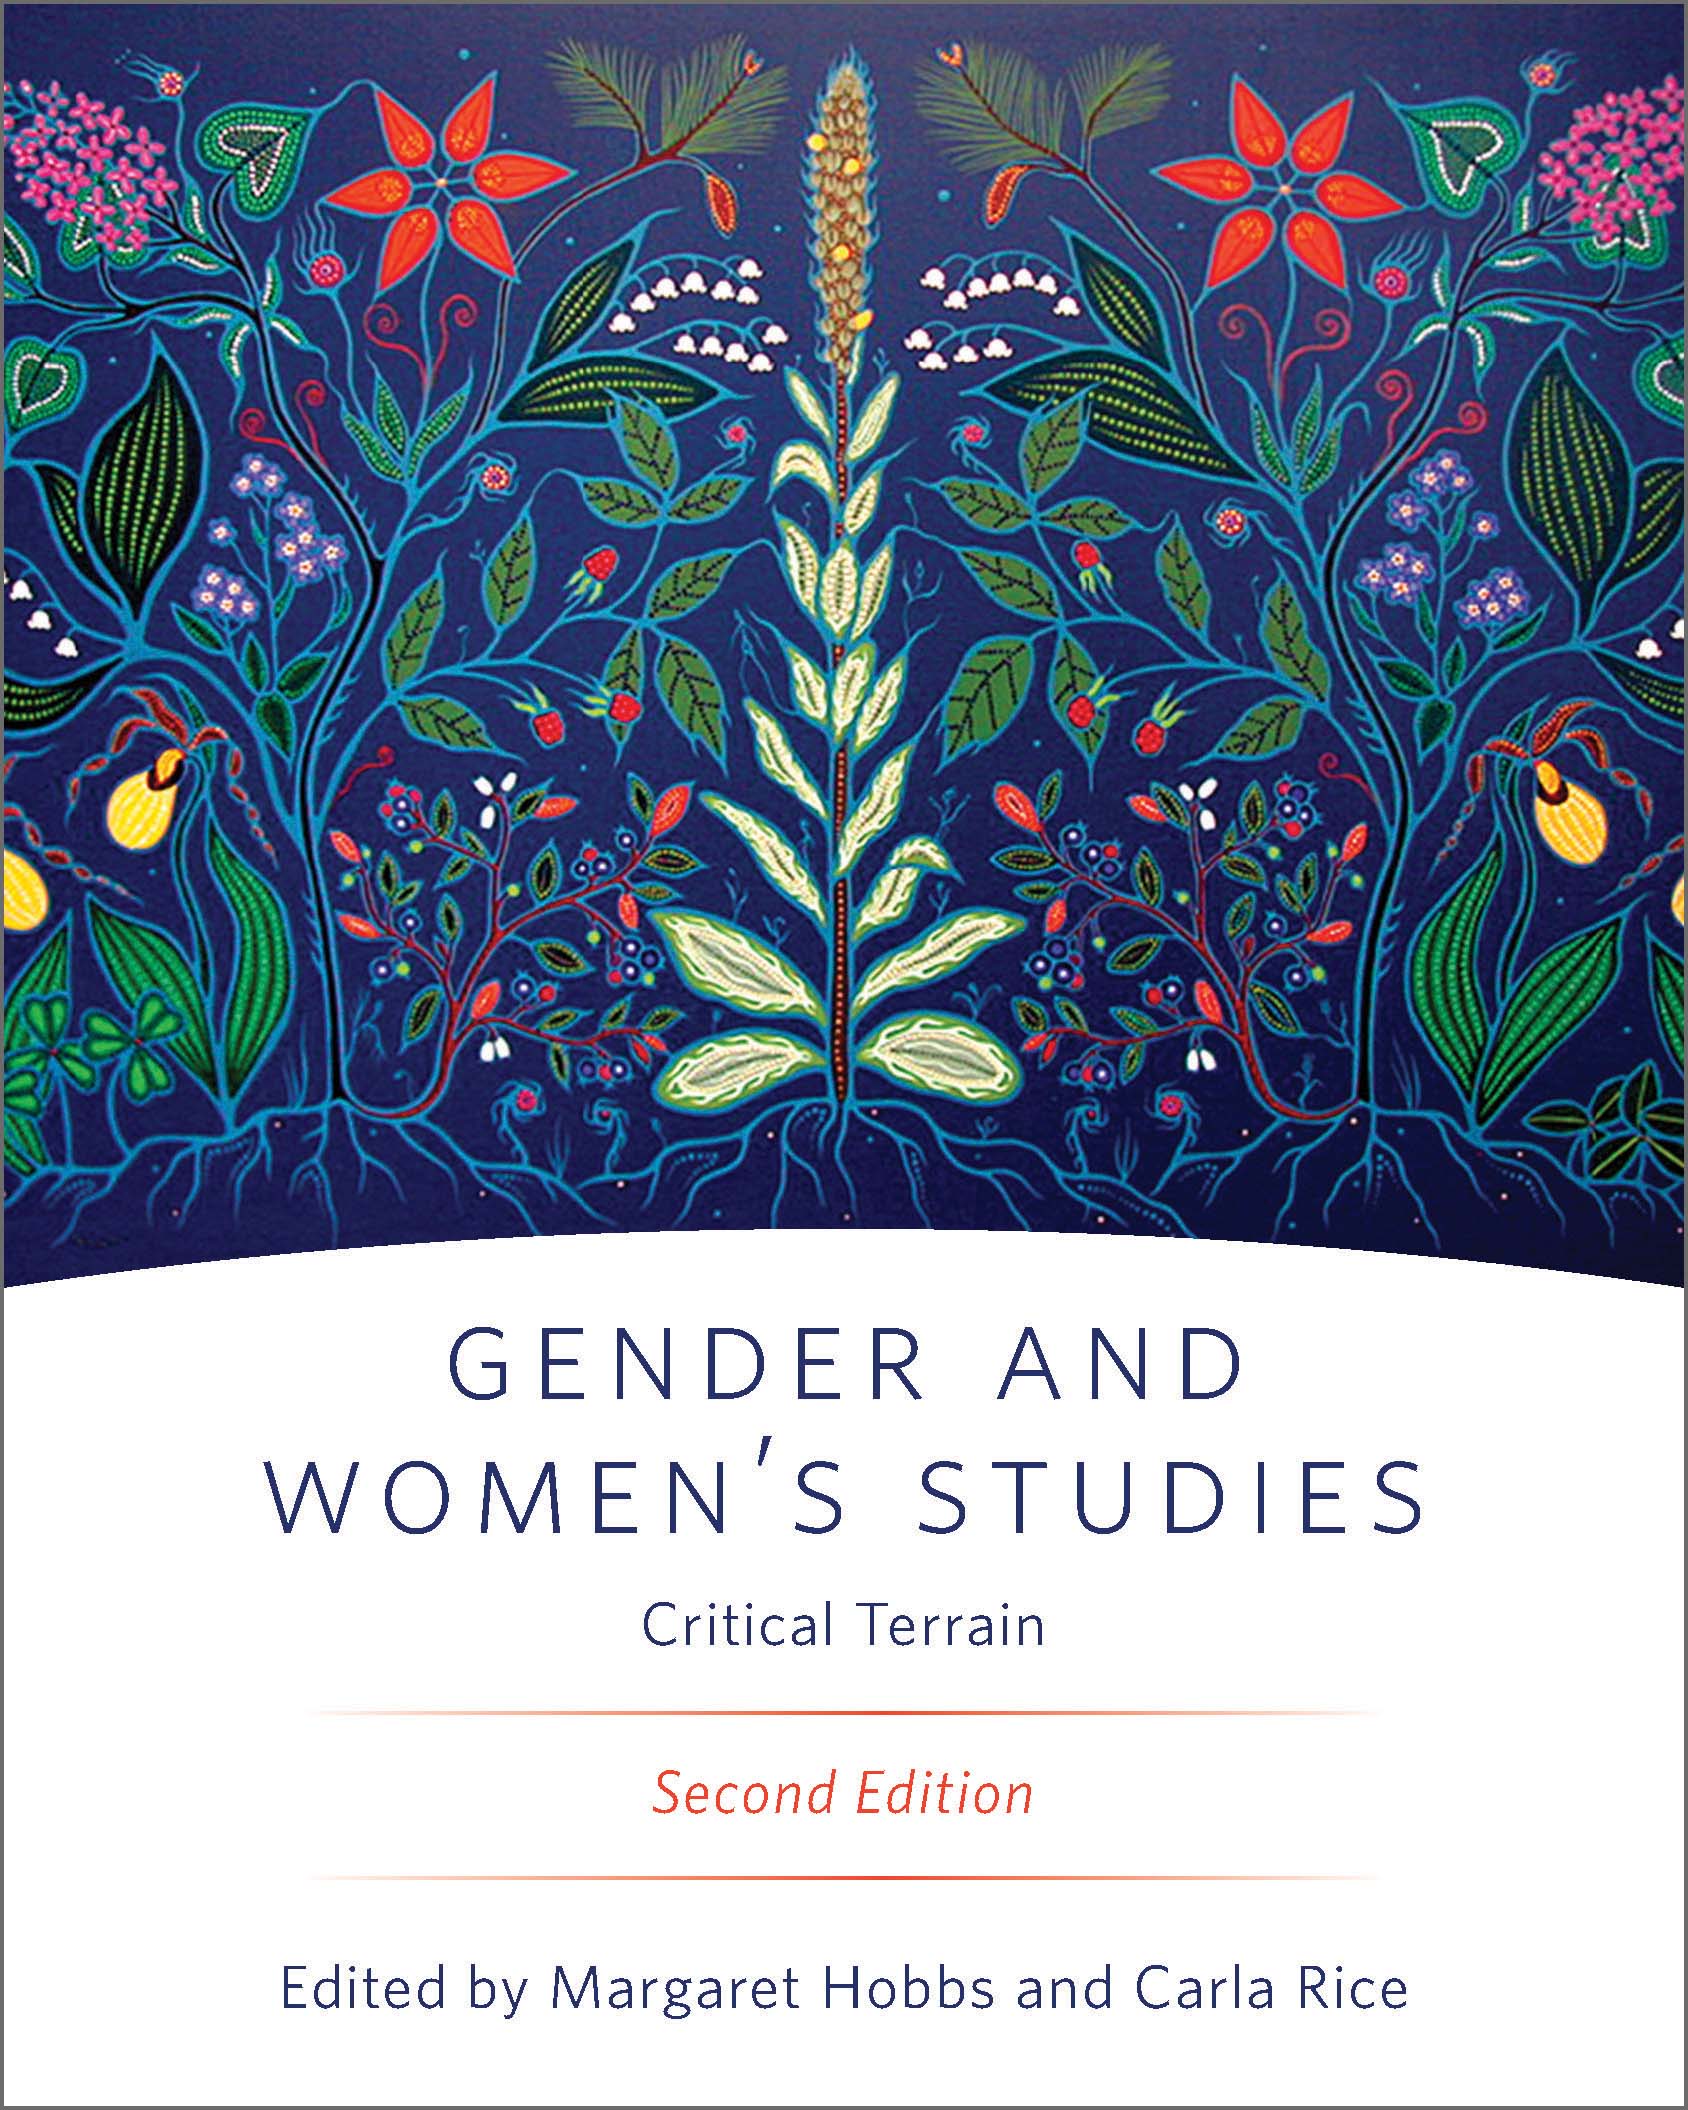 Gender and Women's Studies, Second Edition